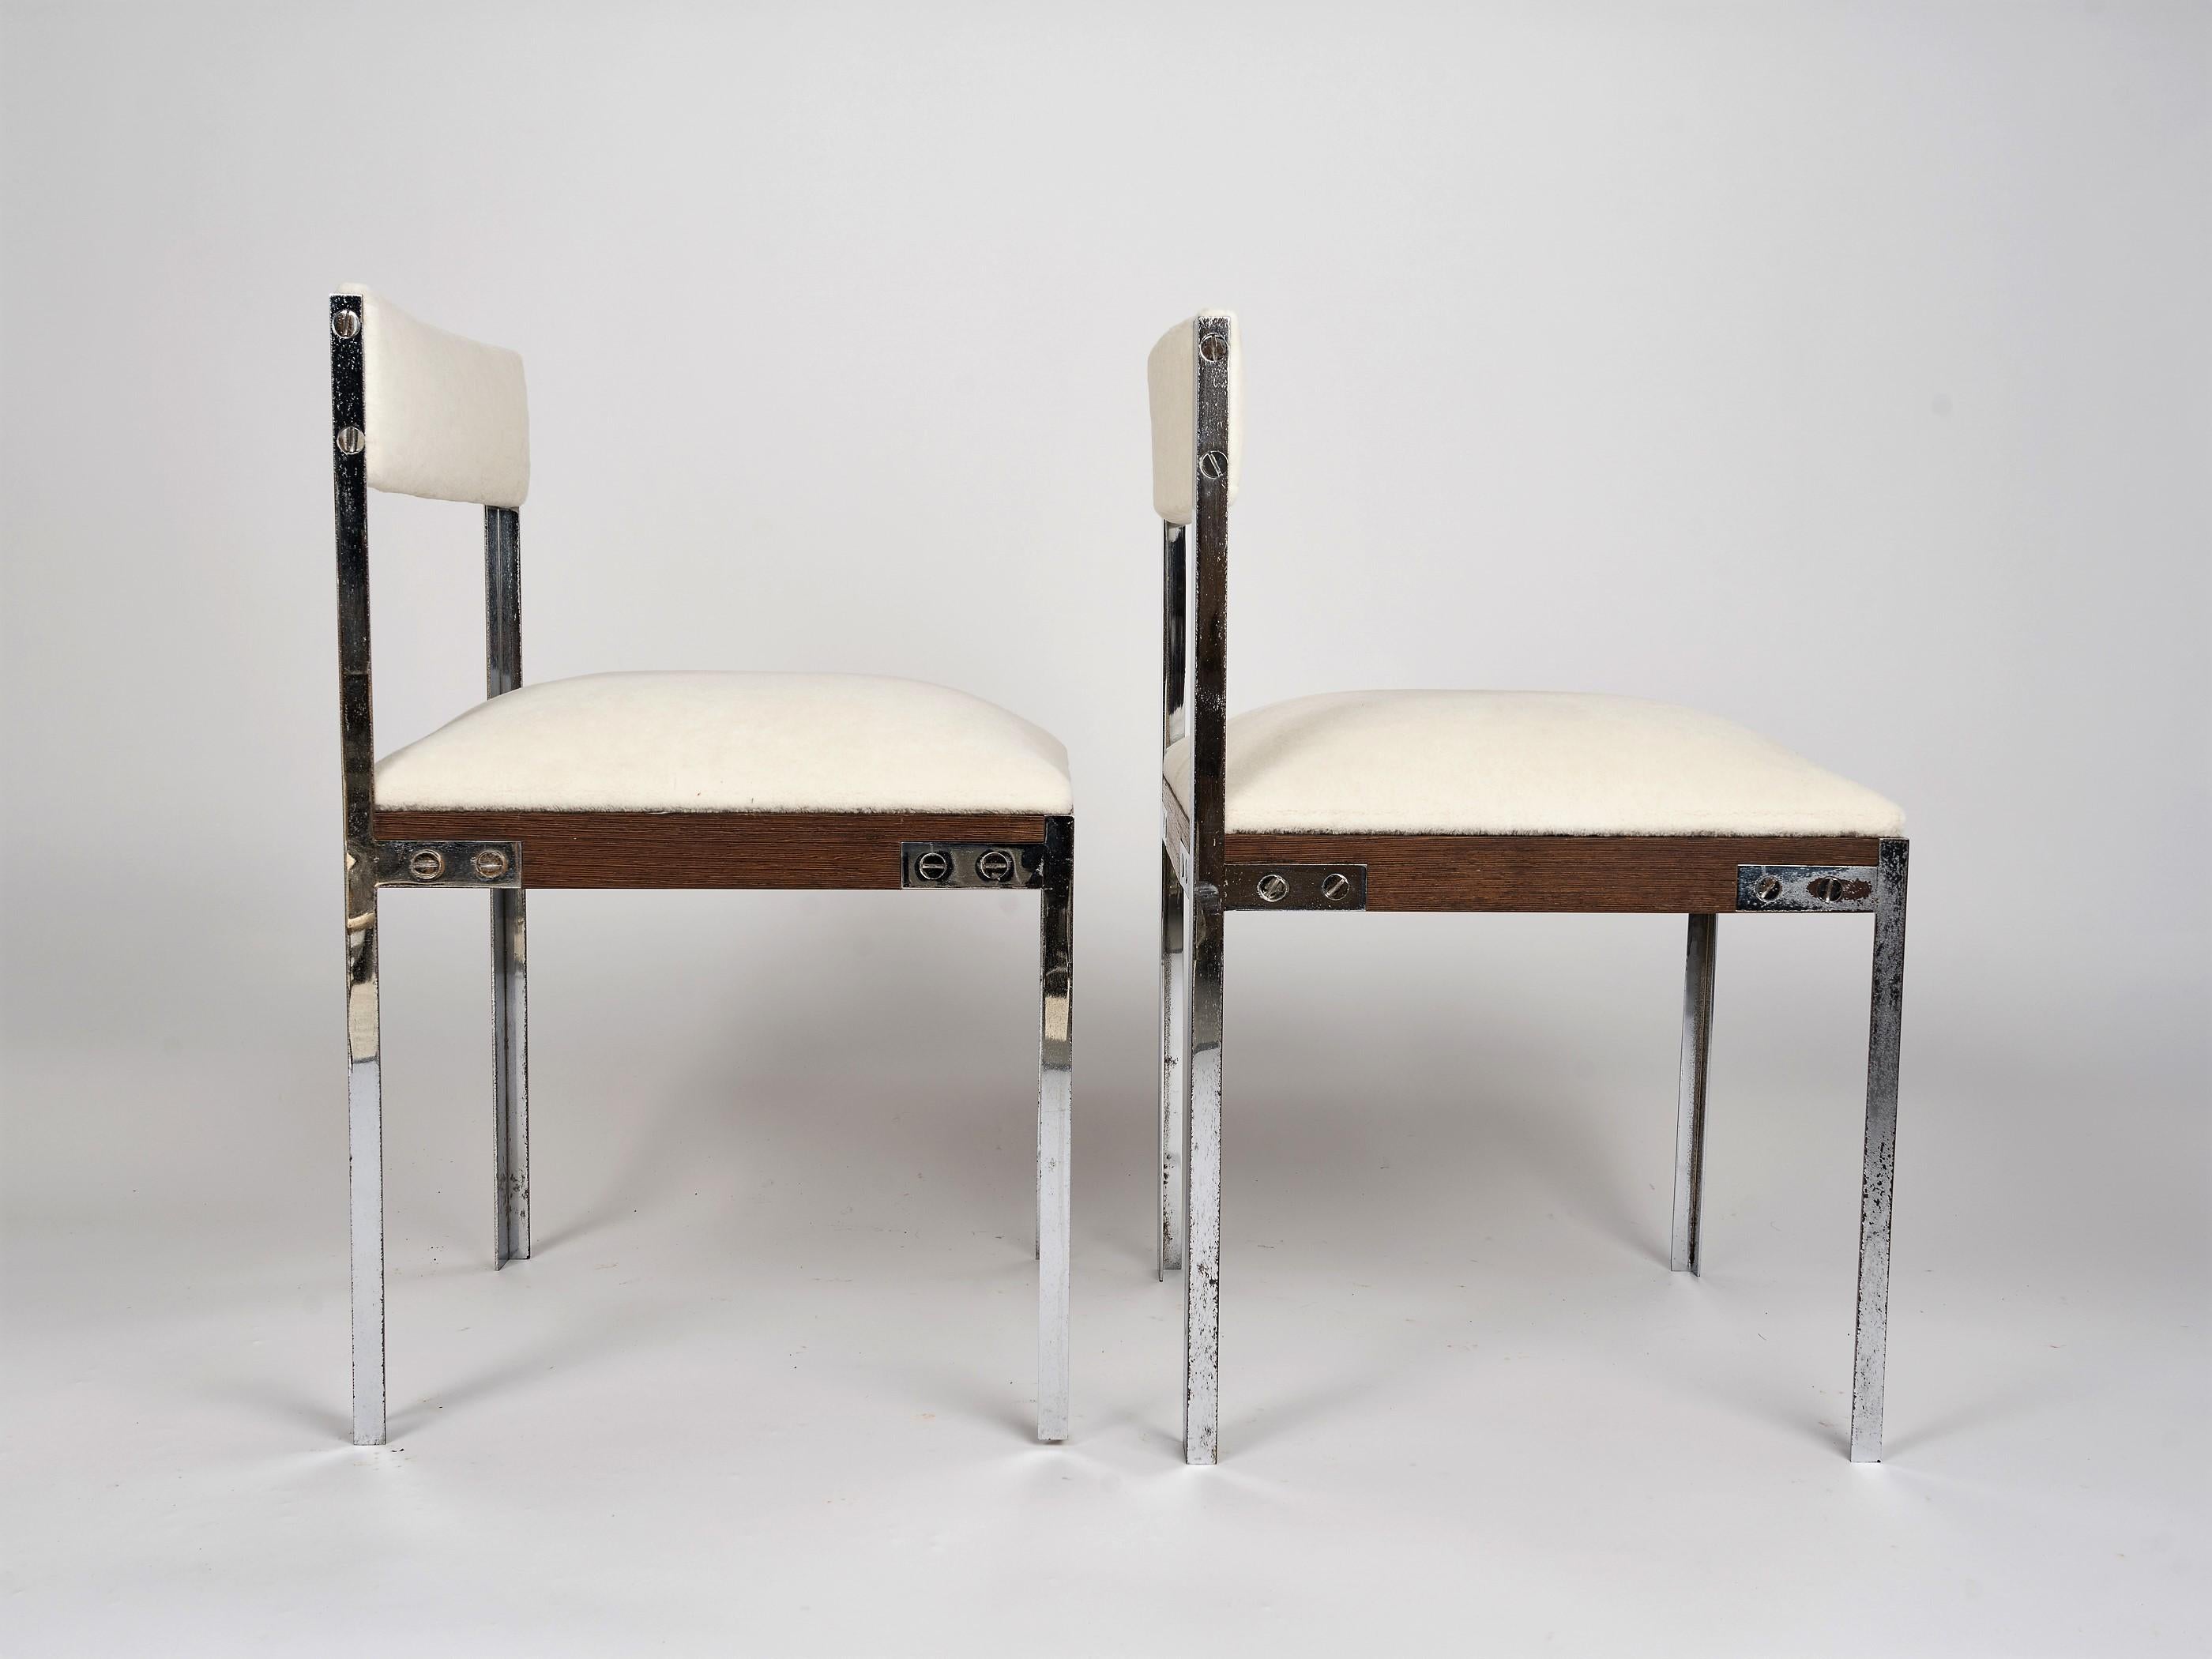 Plated Pair of Chrome and Palmwood Chairs by Hubert Nicolas, France 1970's For Sale